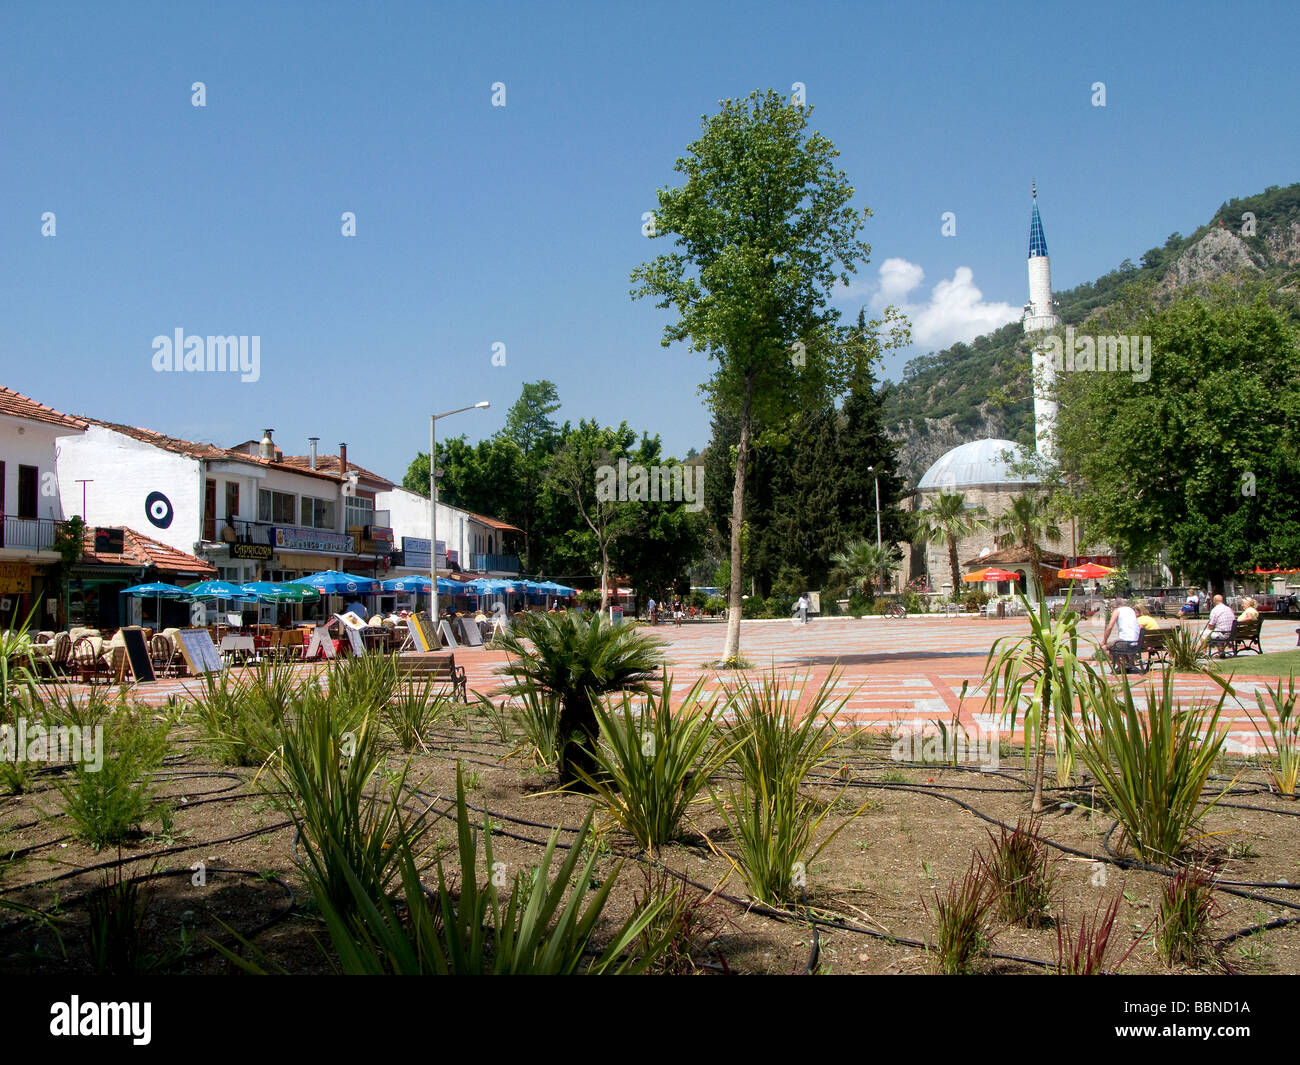 Dalyan Town Square and Mosque, Dalyan, Turkey Stock Photo